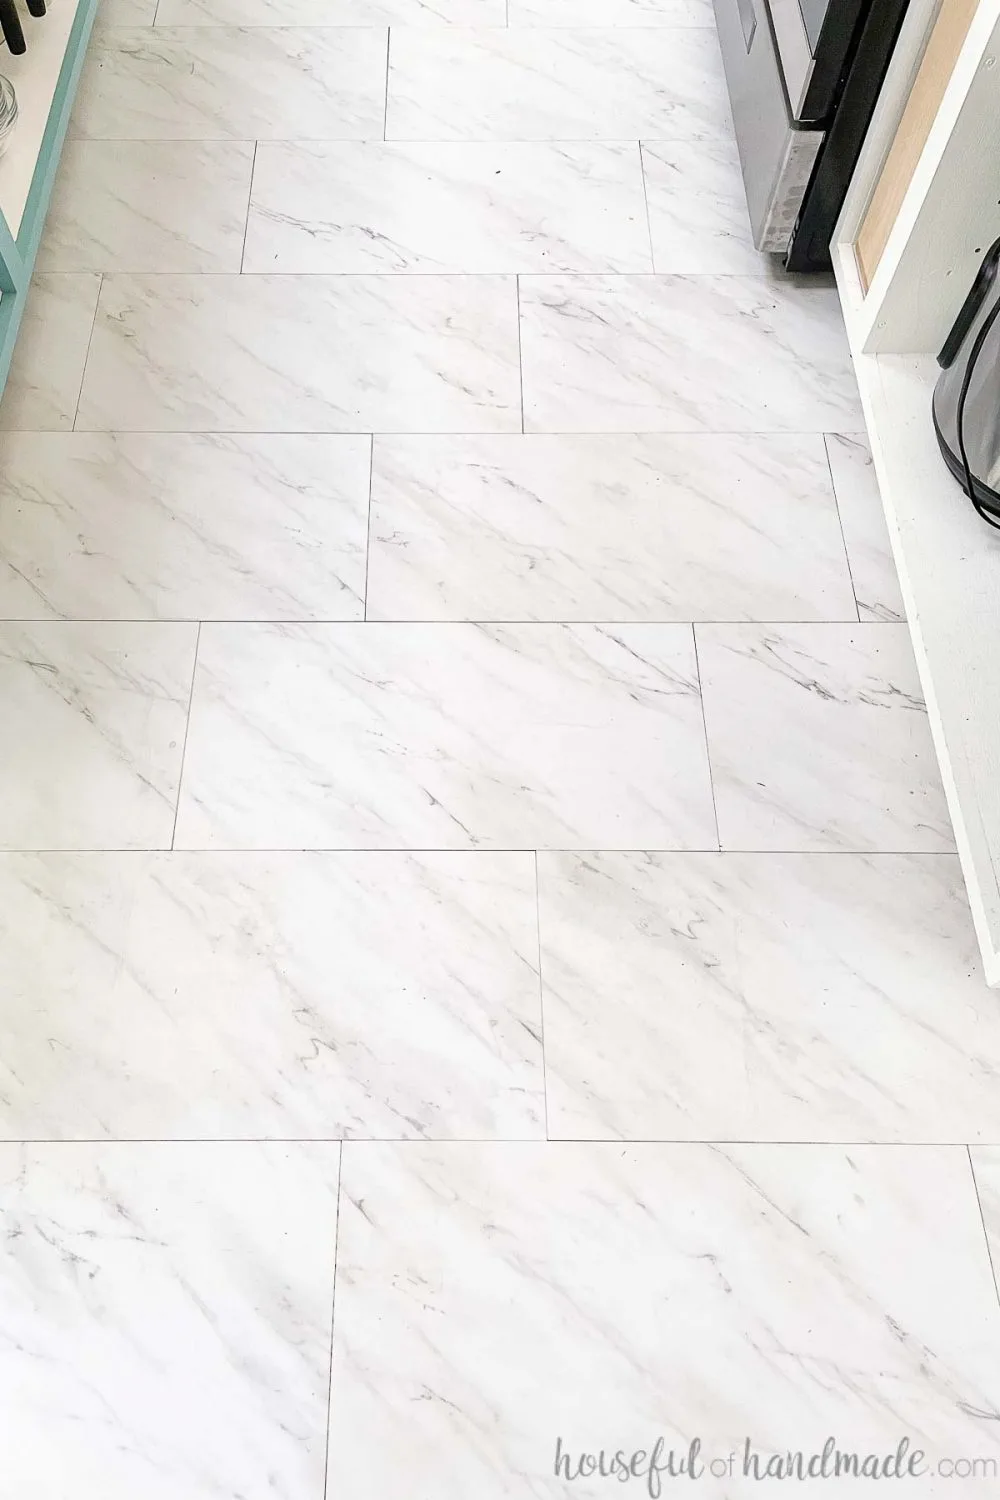 Install L And Stick Vinyl Tiles, How To Put Tile Down